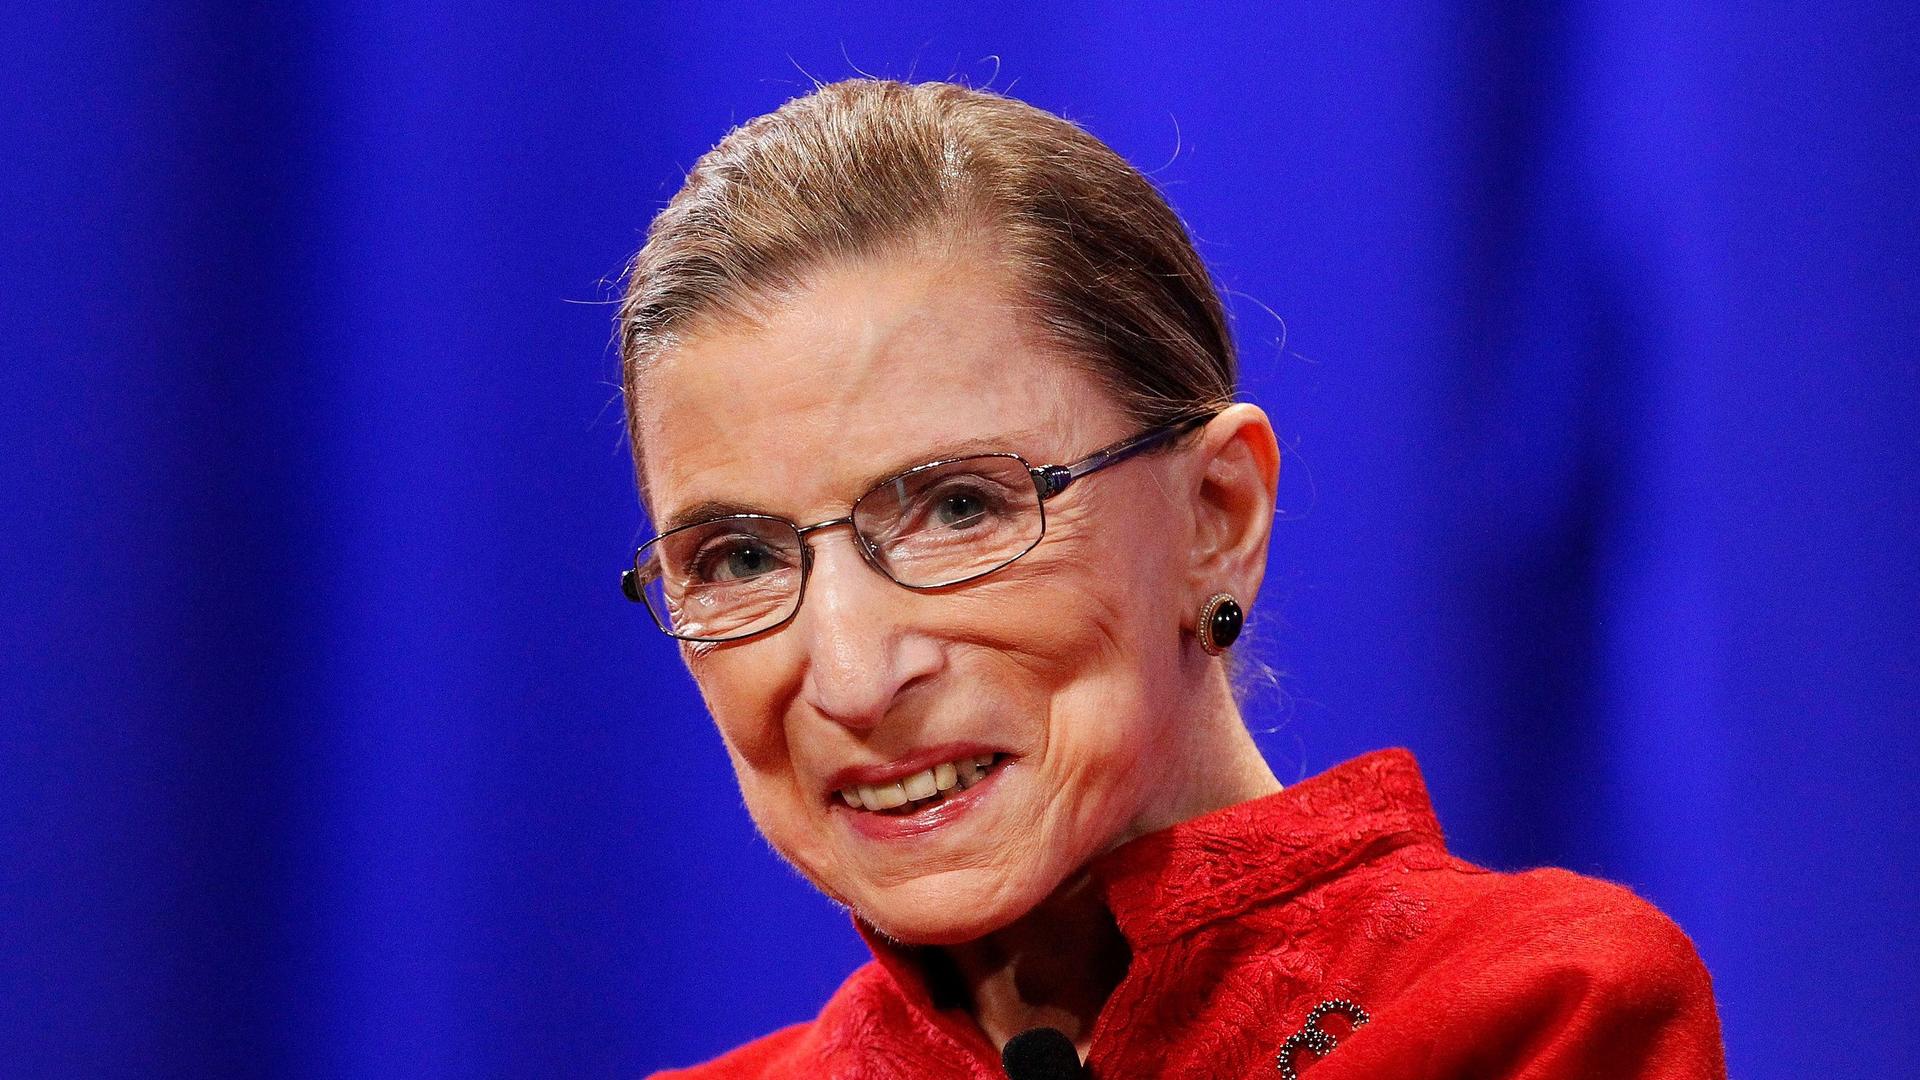 the late Supreme Court Justice Ruth Bader Ginsburg wears a bright red suit jacket